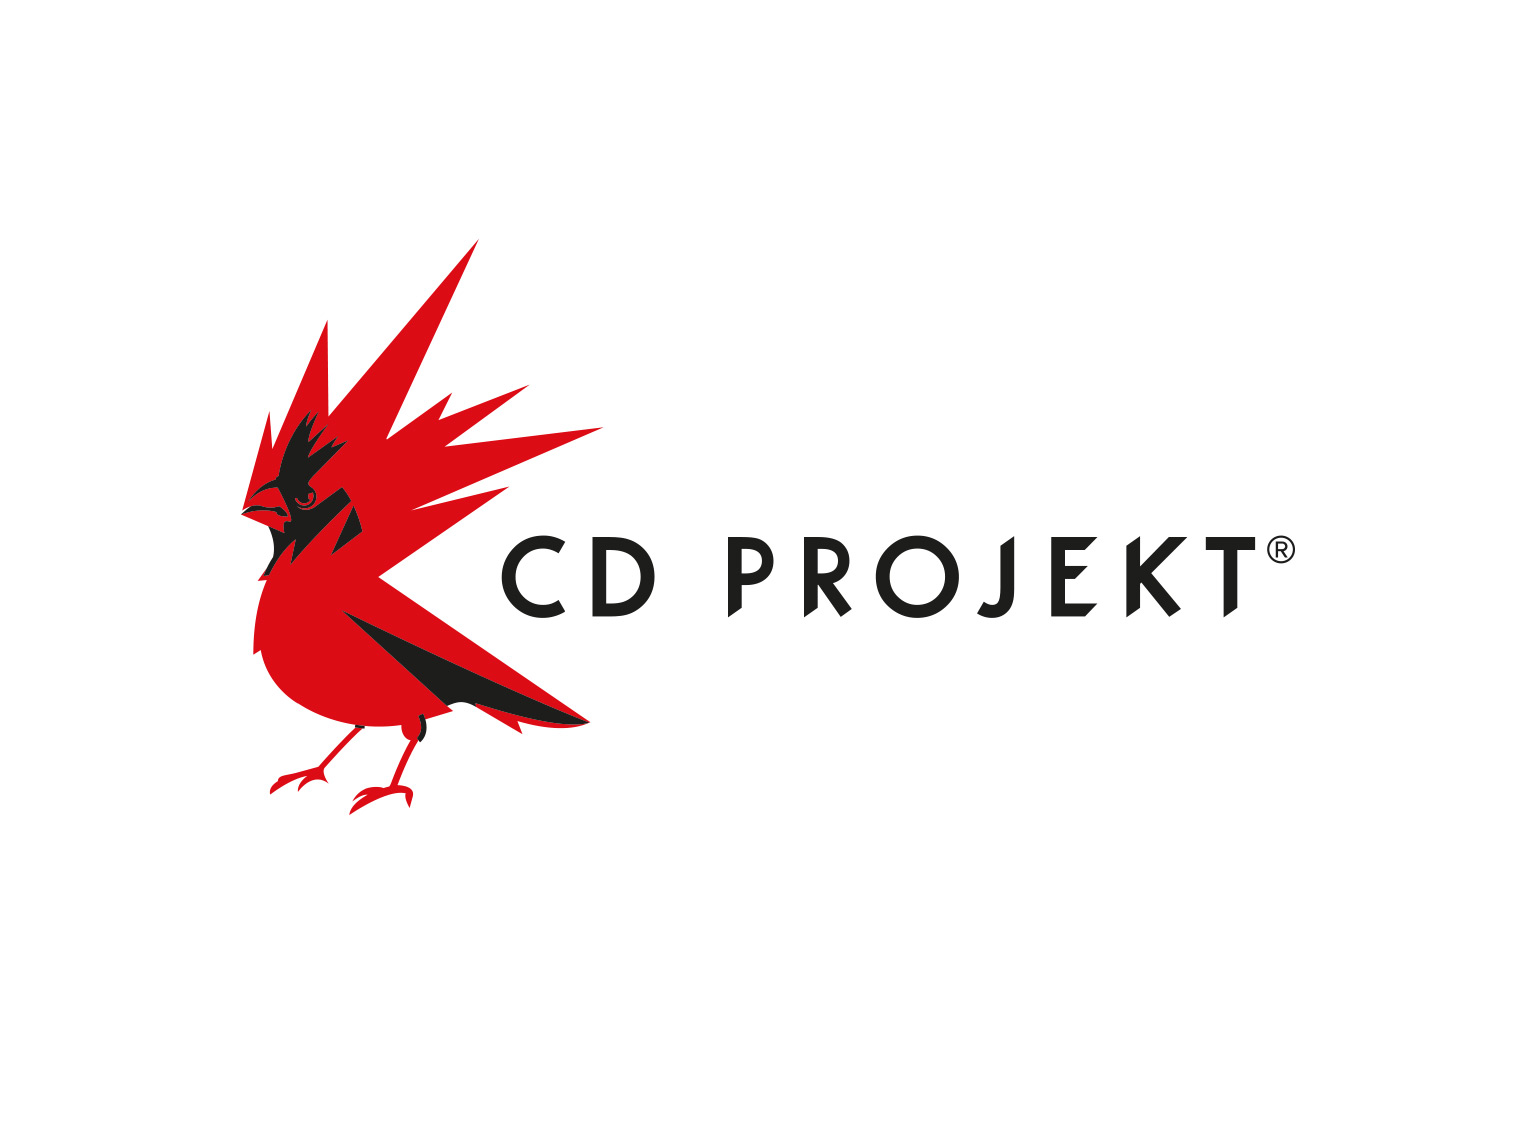 Cd project red share cost